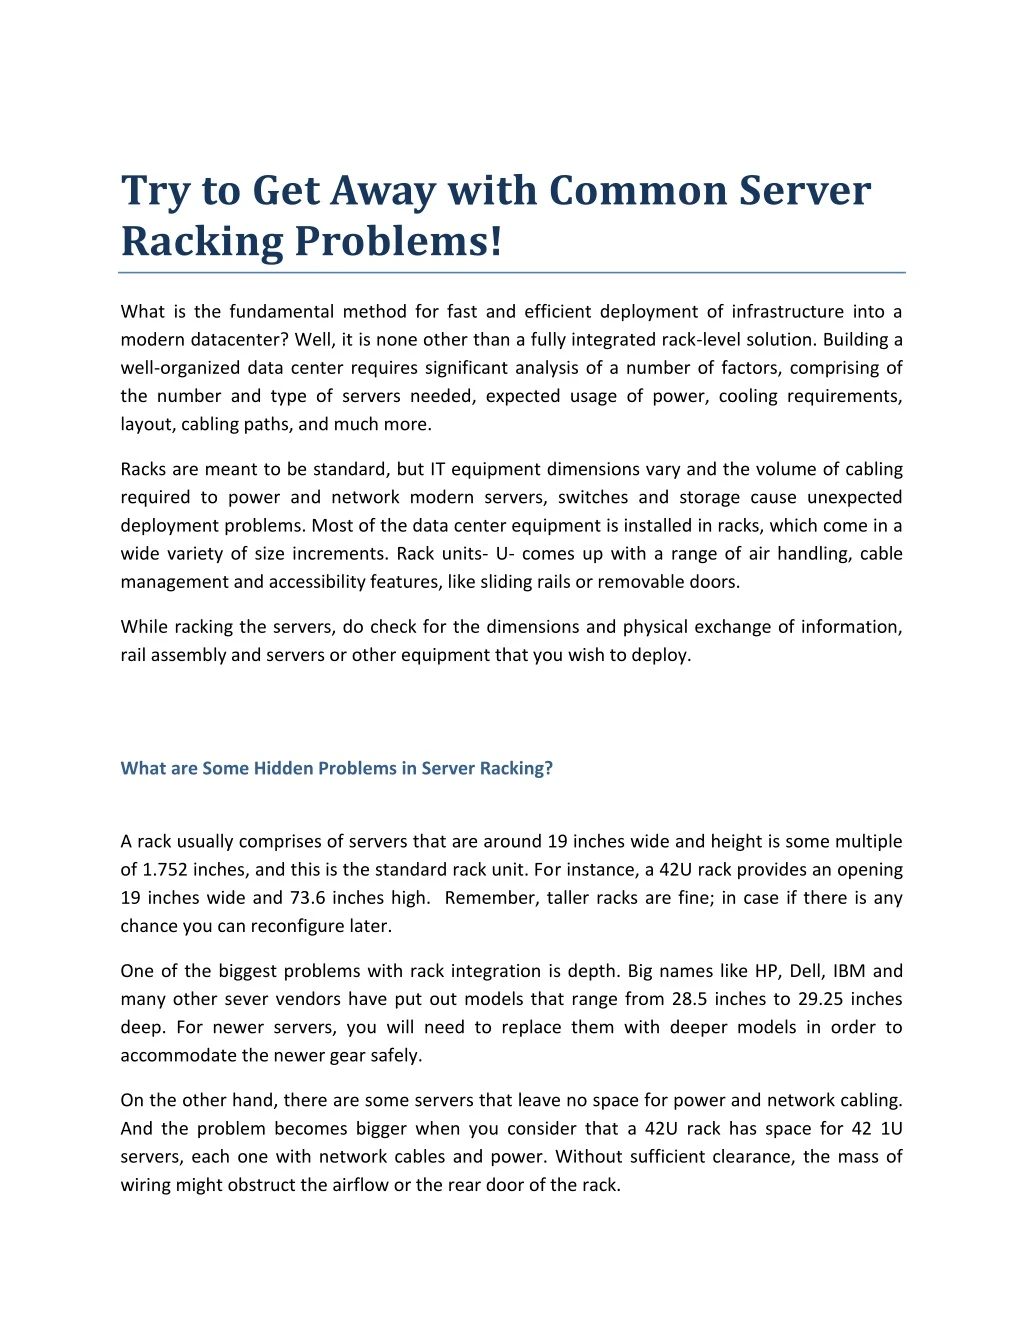 try to get away with common server racking